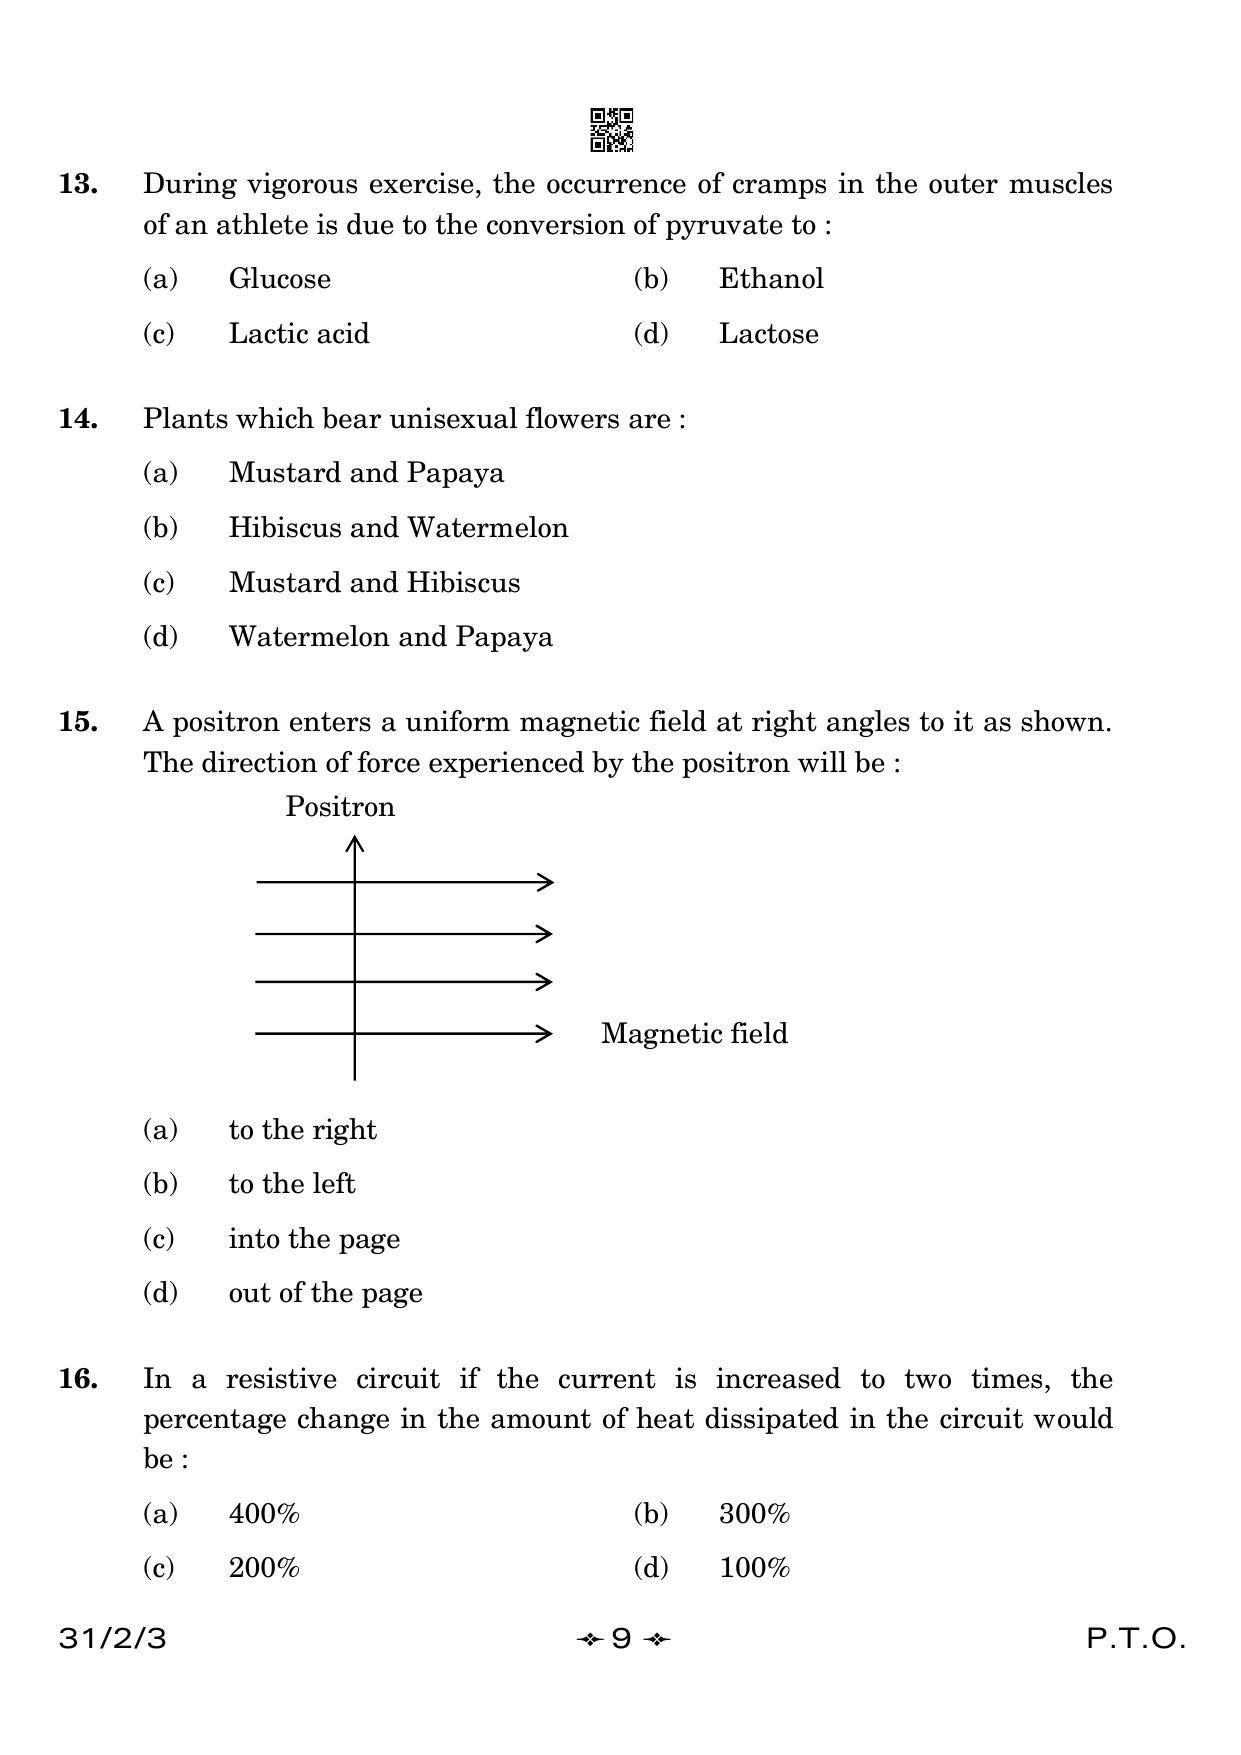 CBSE Class 10 31-2-3 Science 2023 Question Paper - Page 9